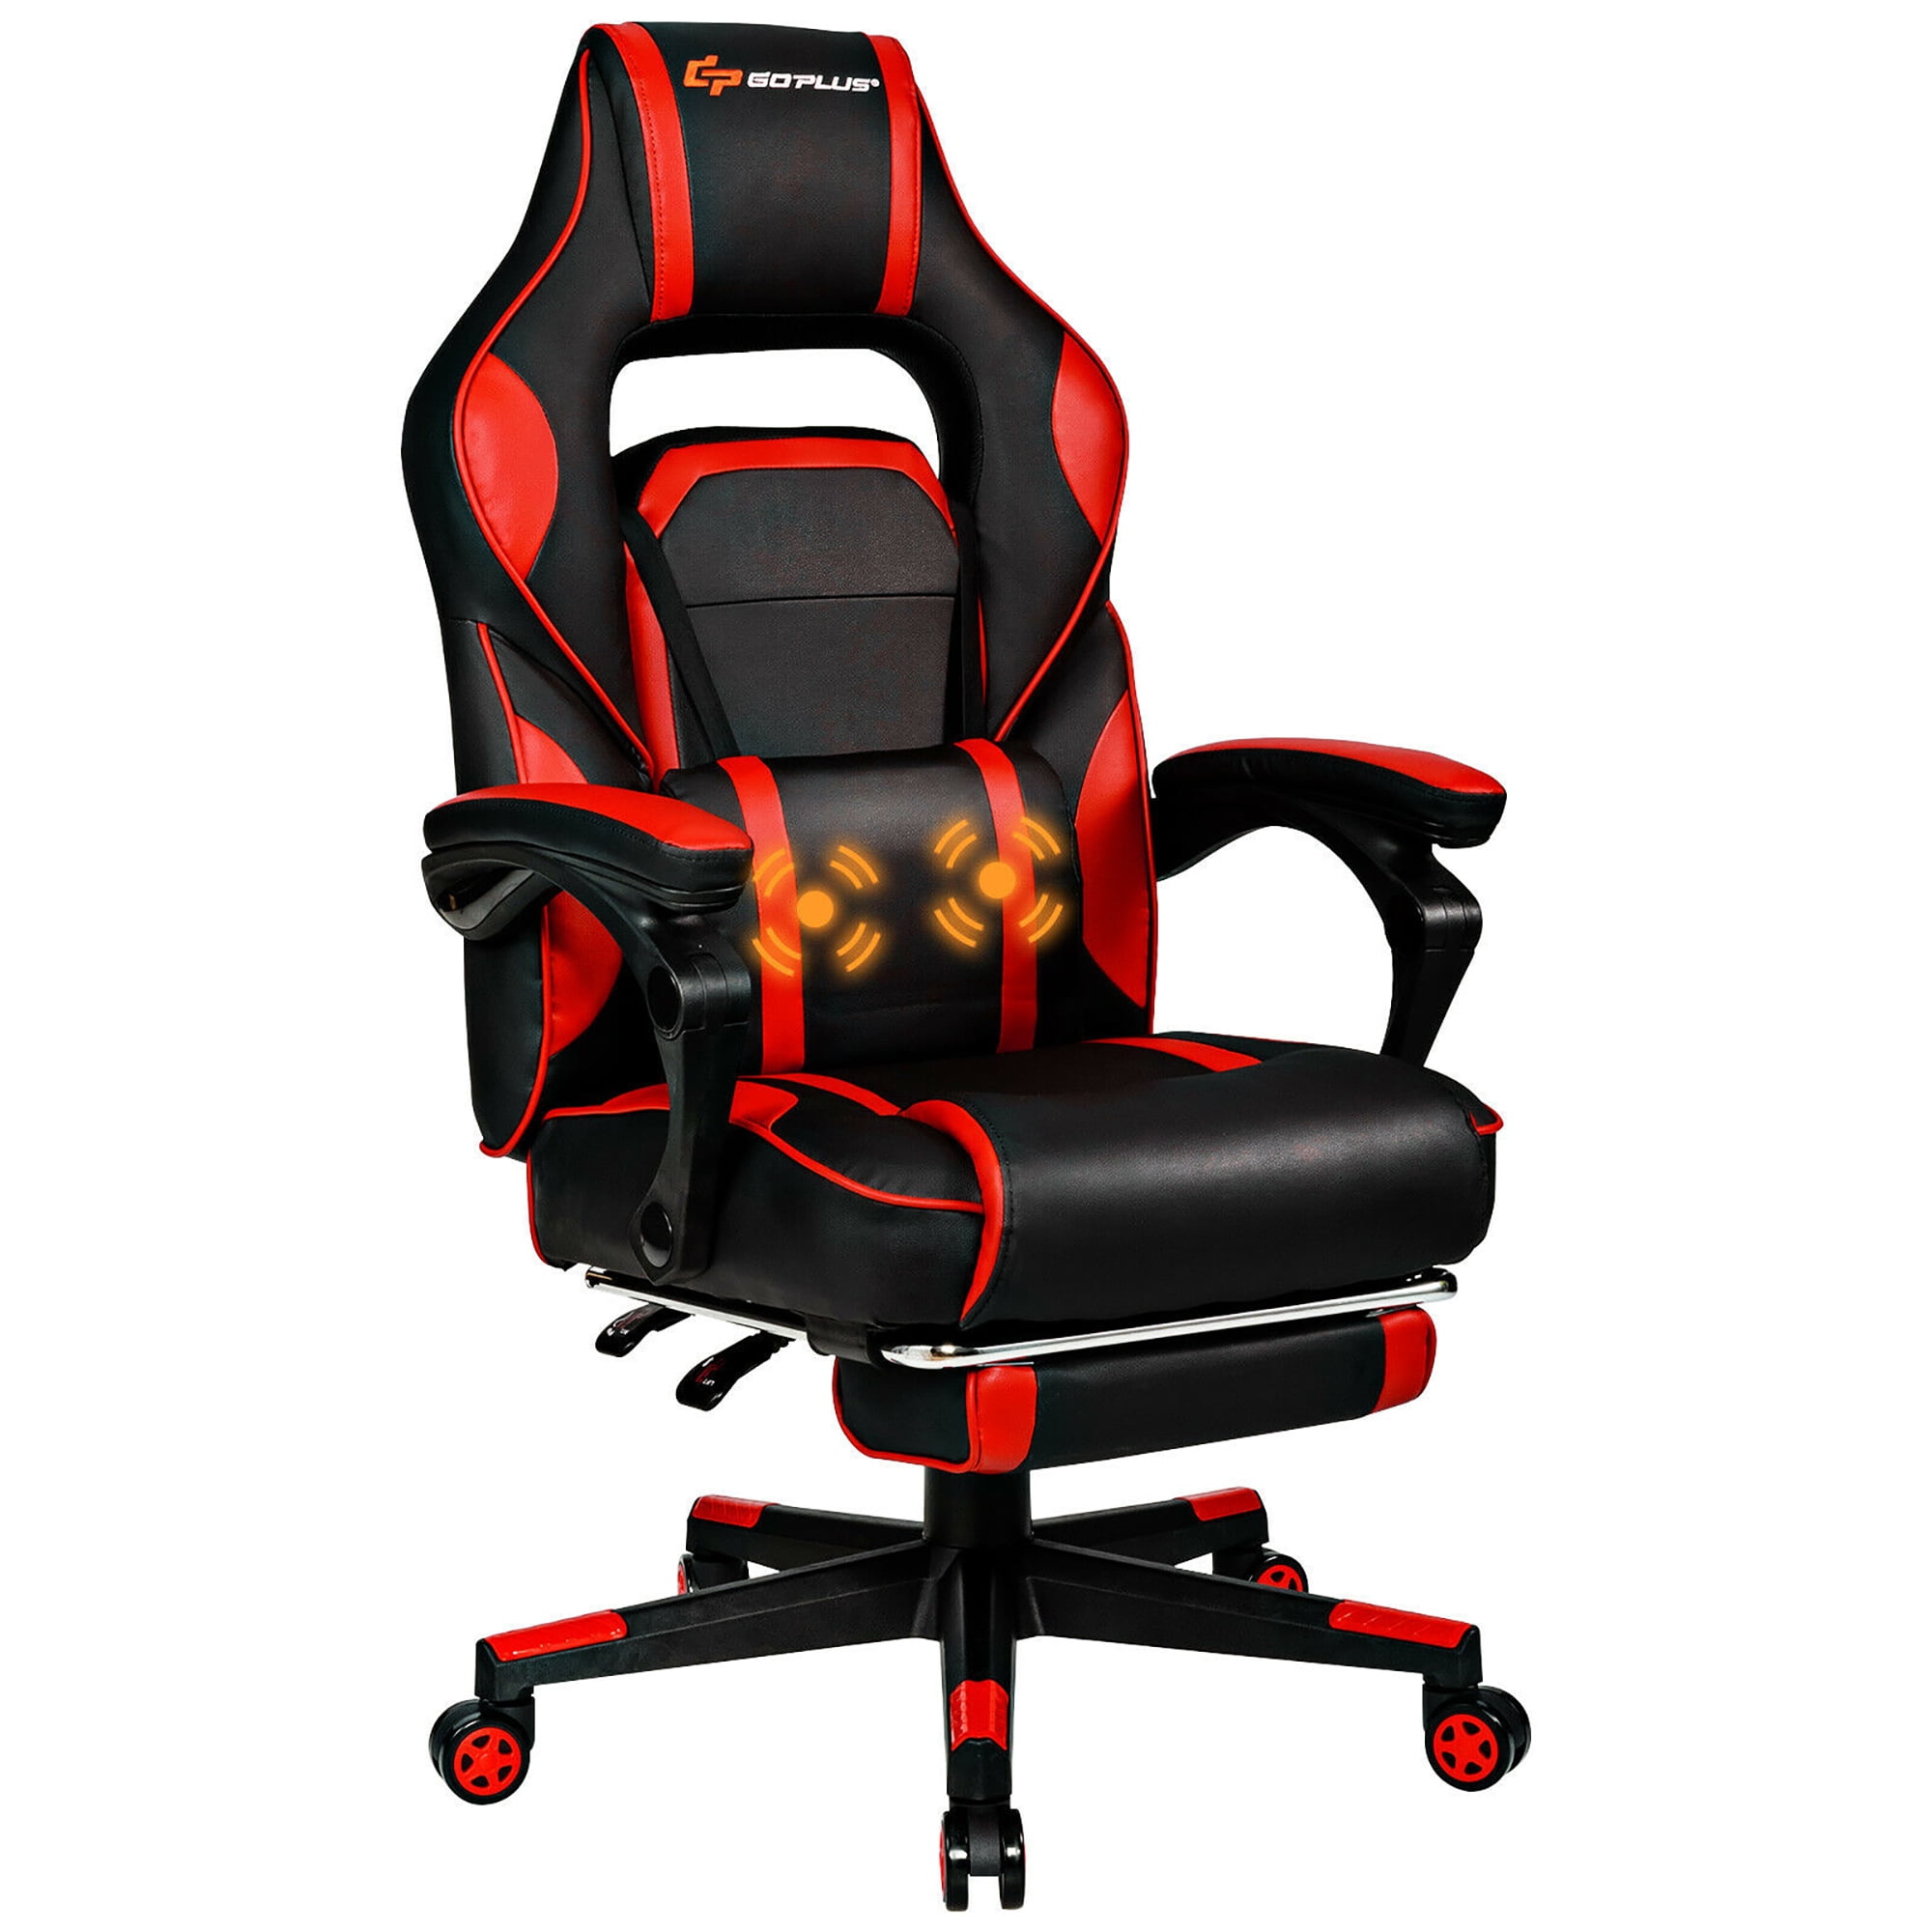  Homoyoyo Seat Recliner Desk Chair Gaming Chair Office